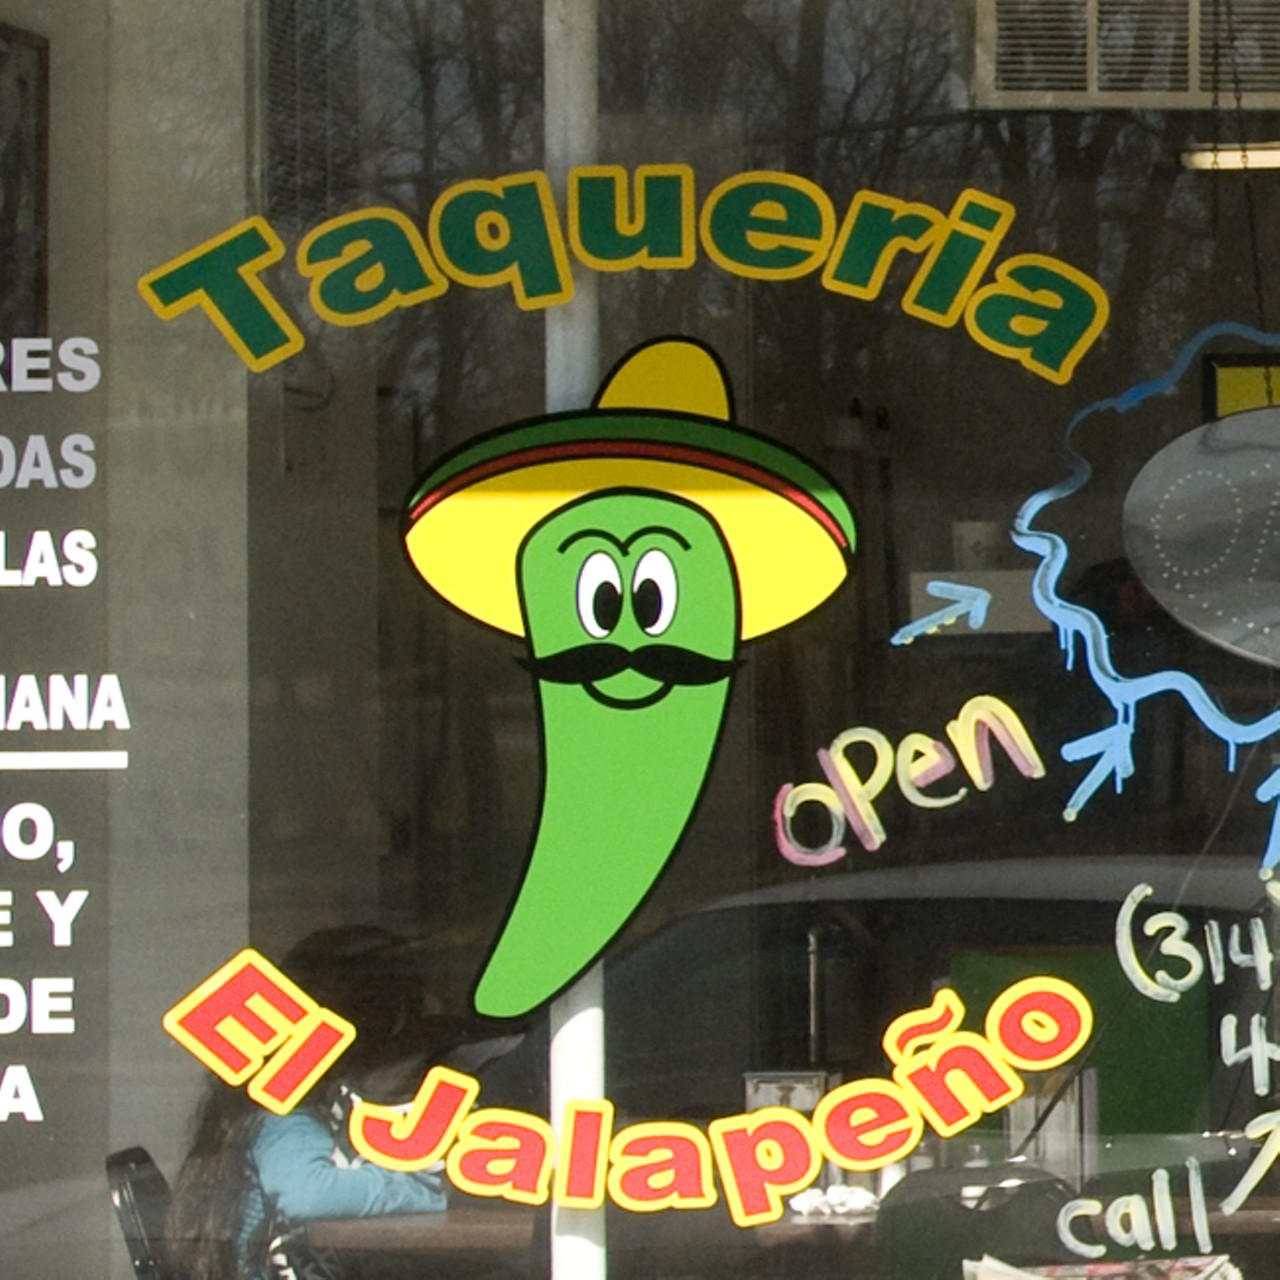 Read "Taco the Town: Taqueria el Jalape&ntilde;o scores another point for north county in the geographical battle for local Mexican restaurant supremacy" by Ian Froeb.